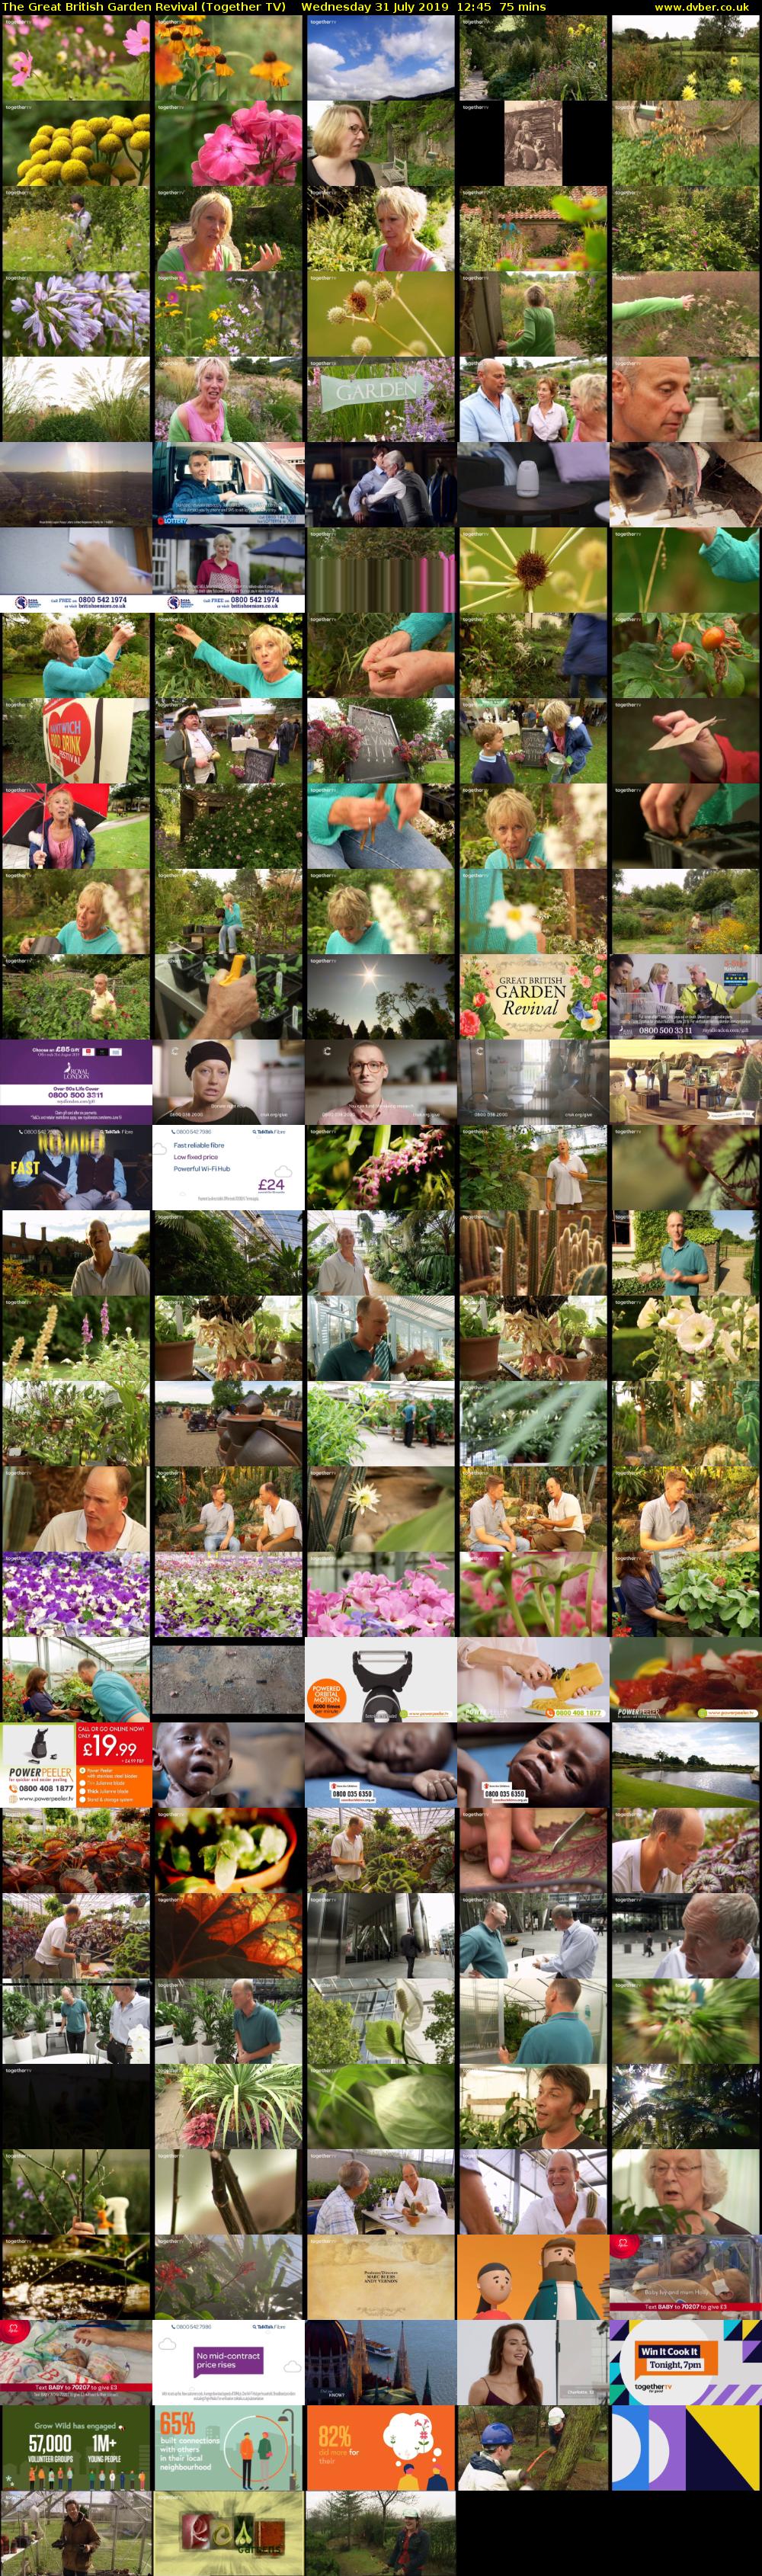 The Great British Garden Revival (Together TV) Wednesday 31 July 2019 12:45 - 14:00